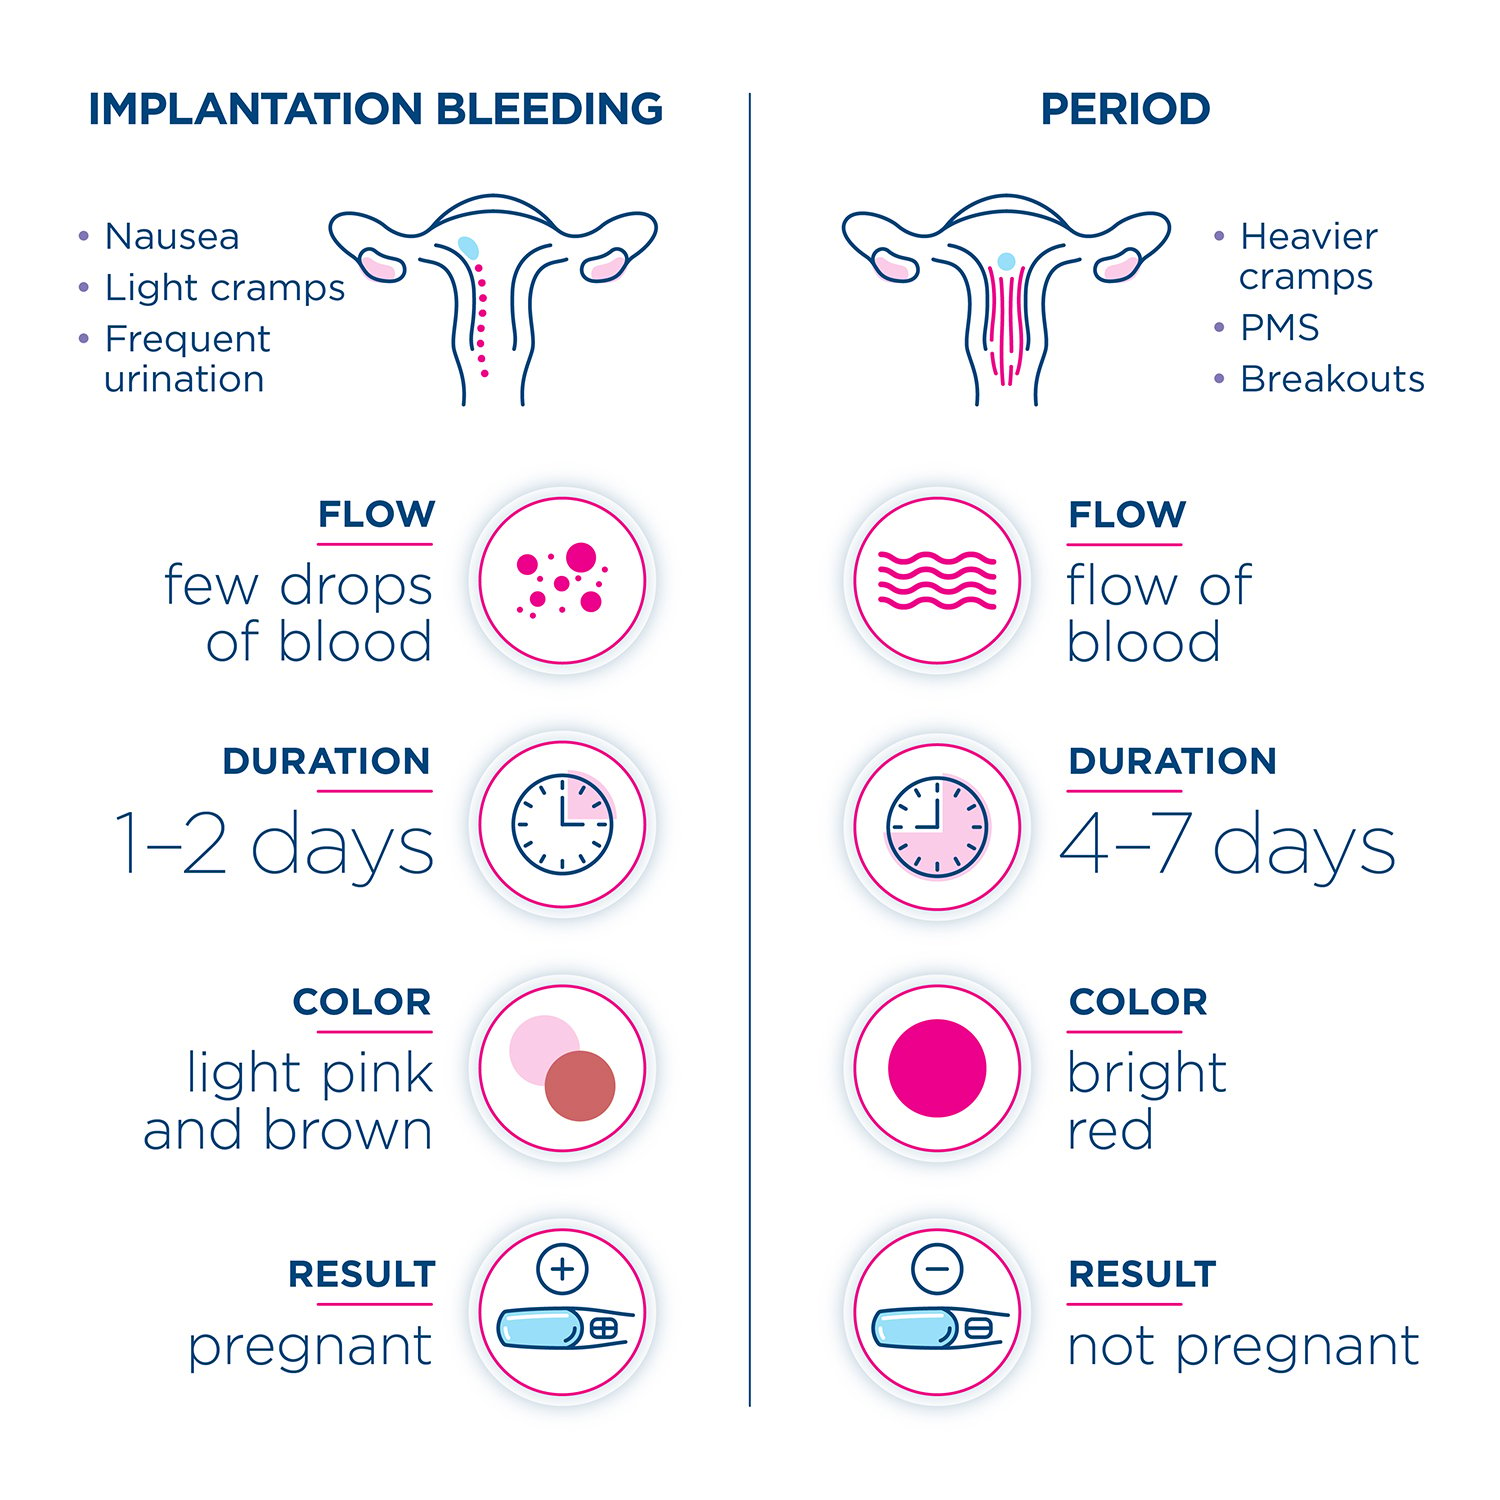 Signs and symptoms to tell the difference of implantation bleeding and your period